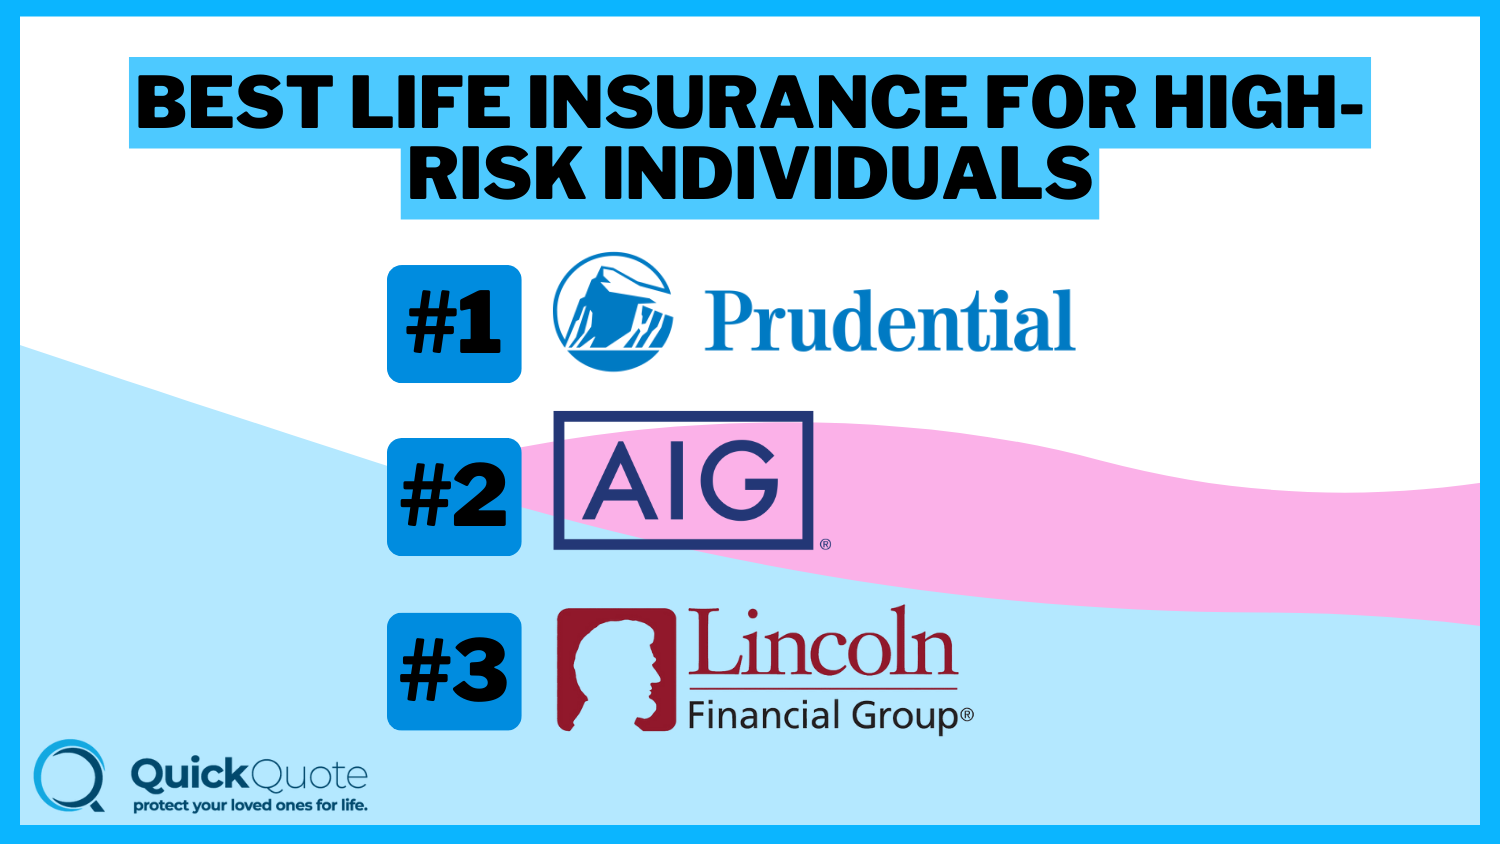 Best Life Insurance for High-Risk Individuals: Prudential, AIG, and Lincoln Life